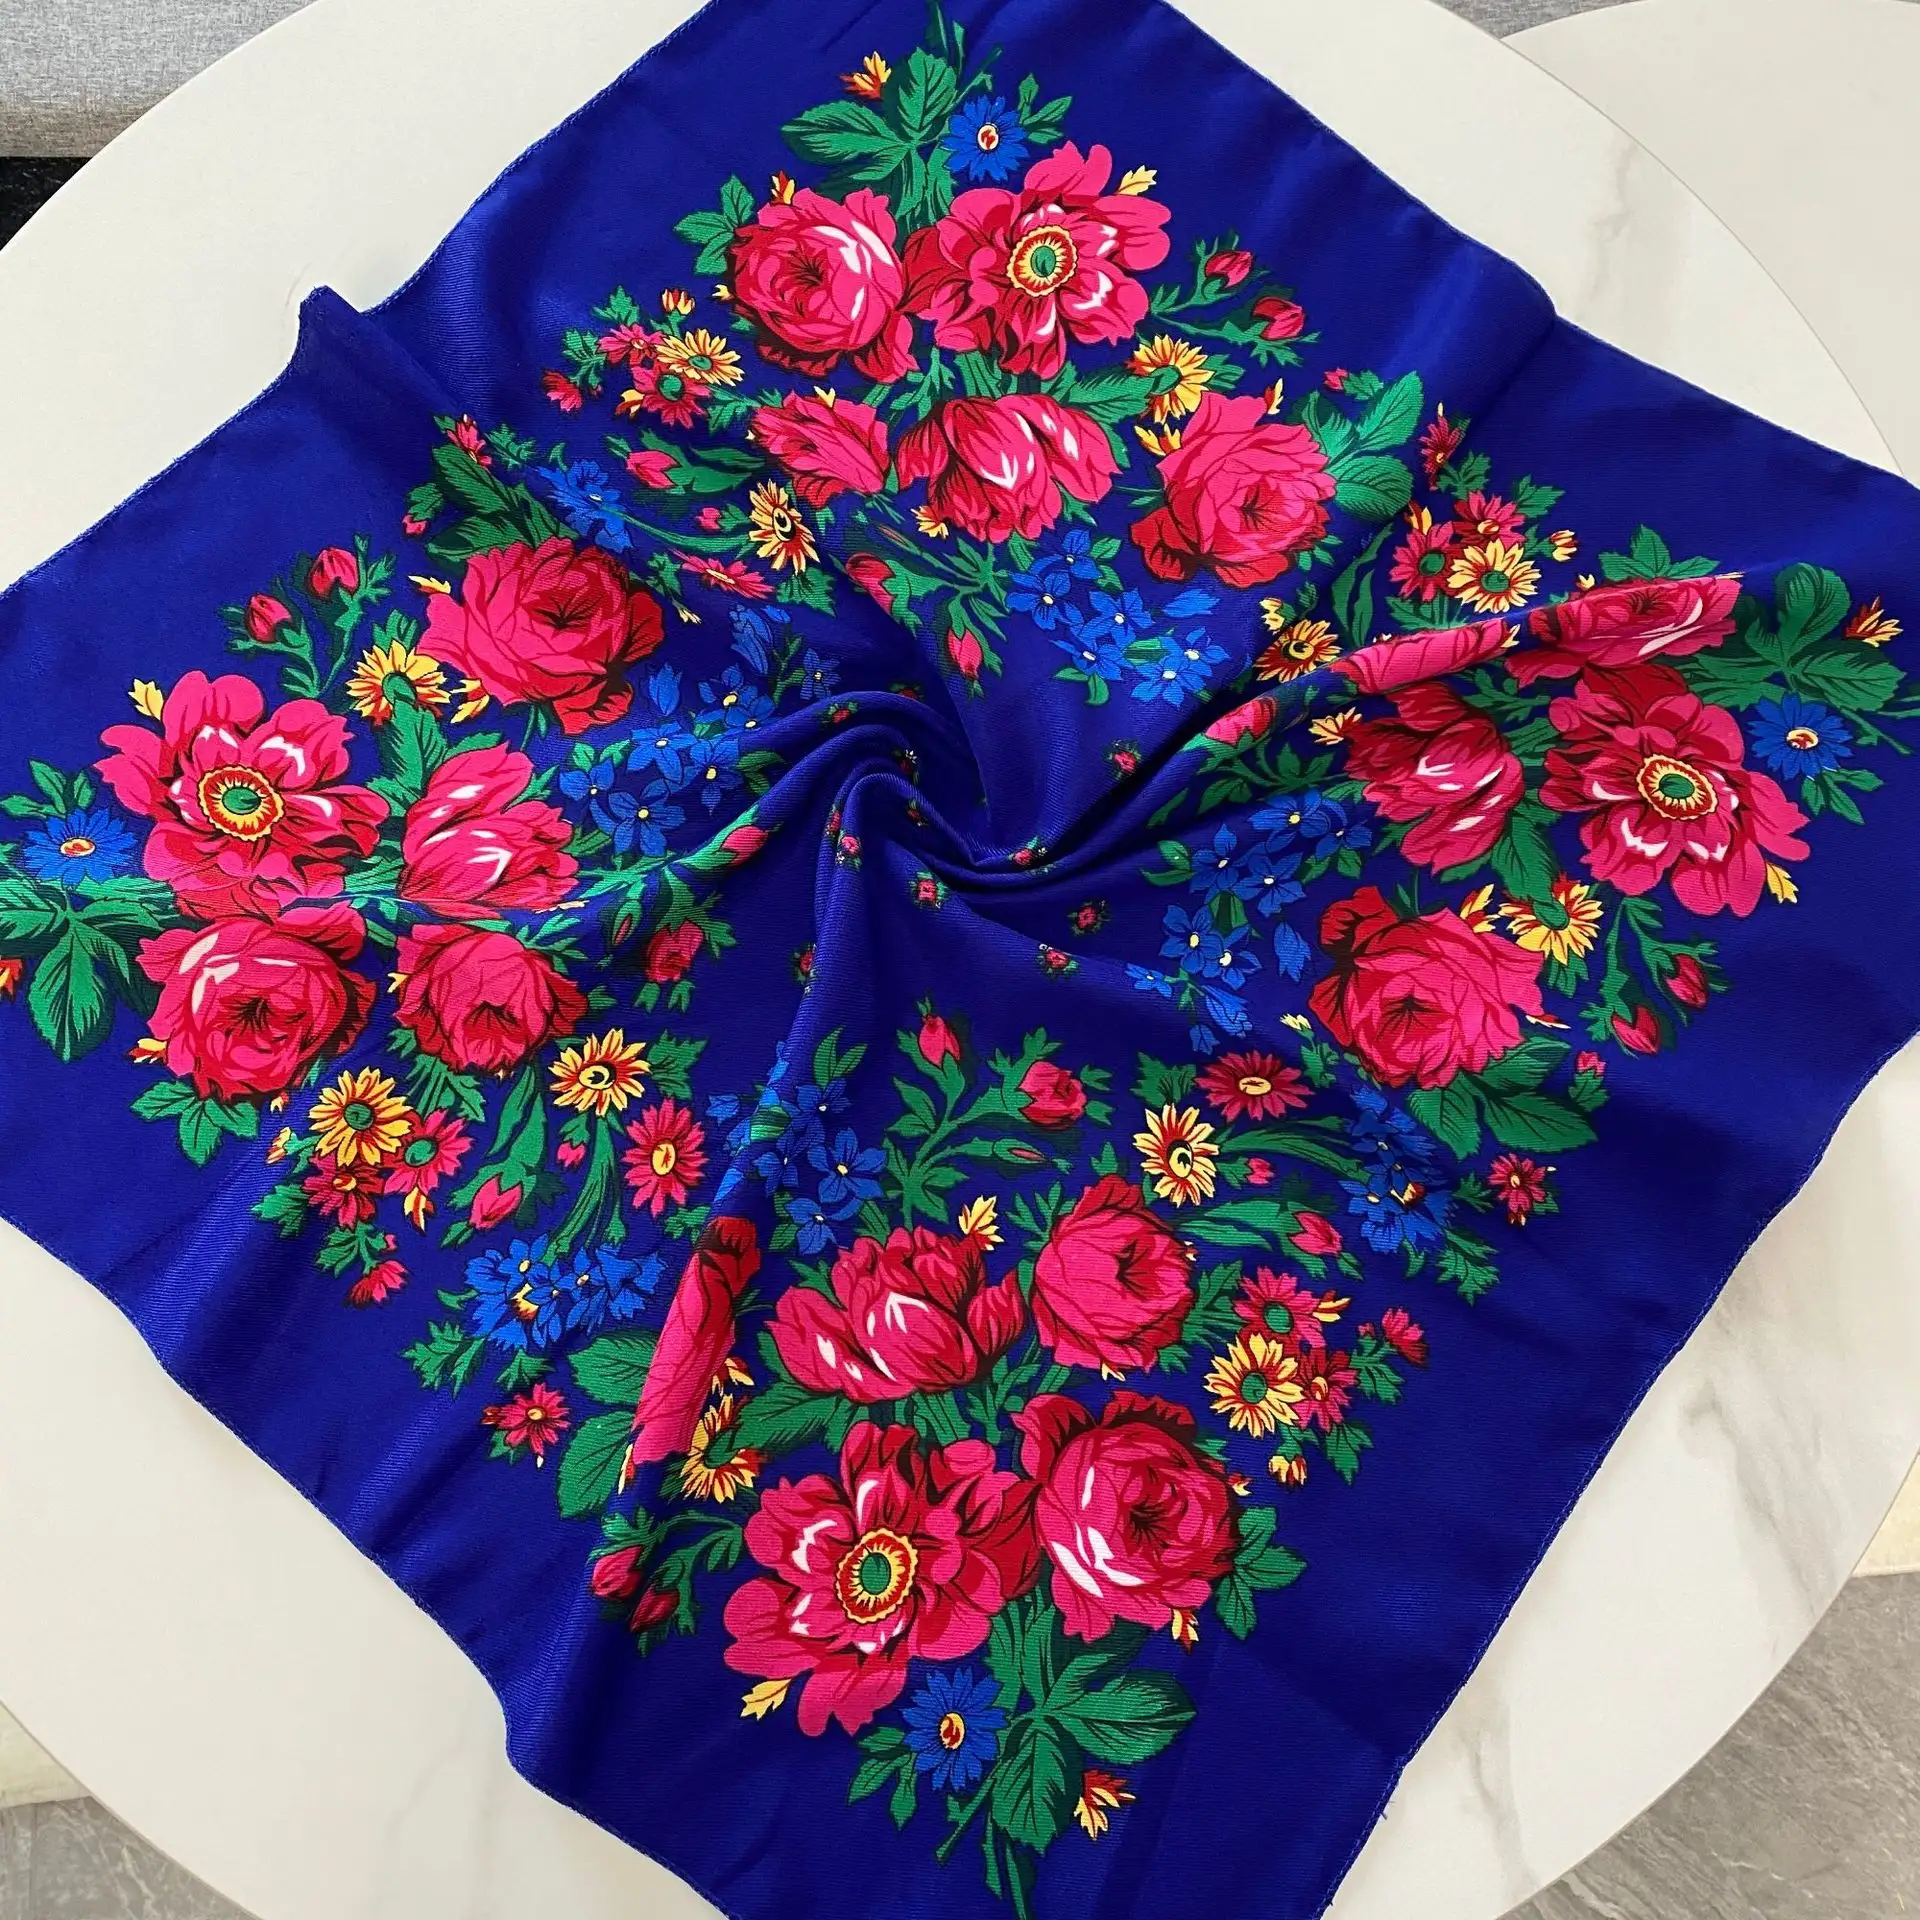 Multipurpose Russian Style 70*70cm Flower Floral Printed Ethnic Scarves Neckwear Head Wrap Square Scarf Shawl For Women